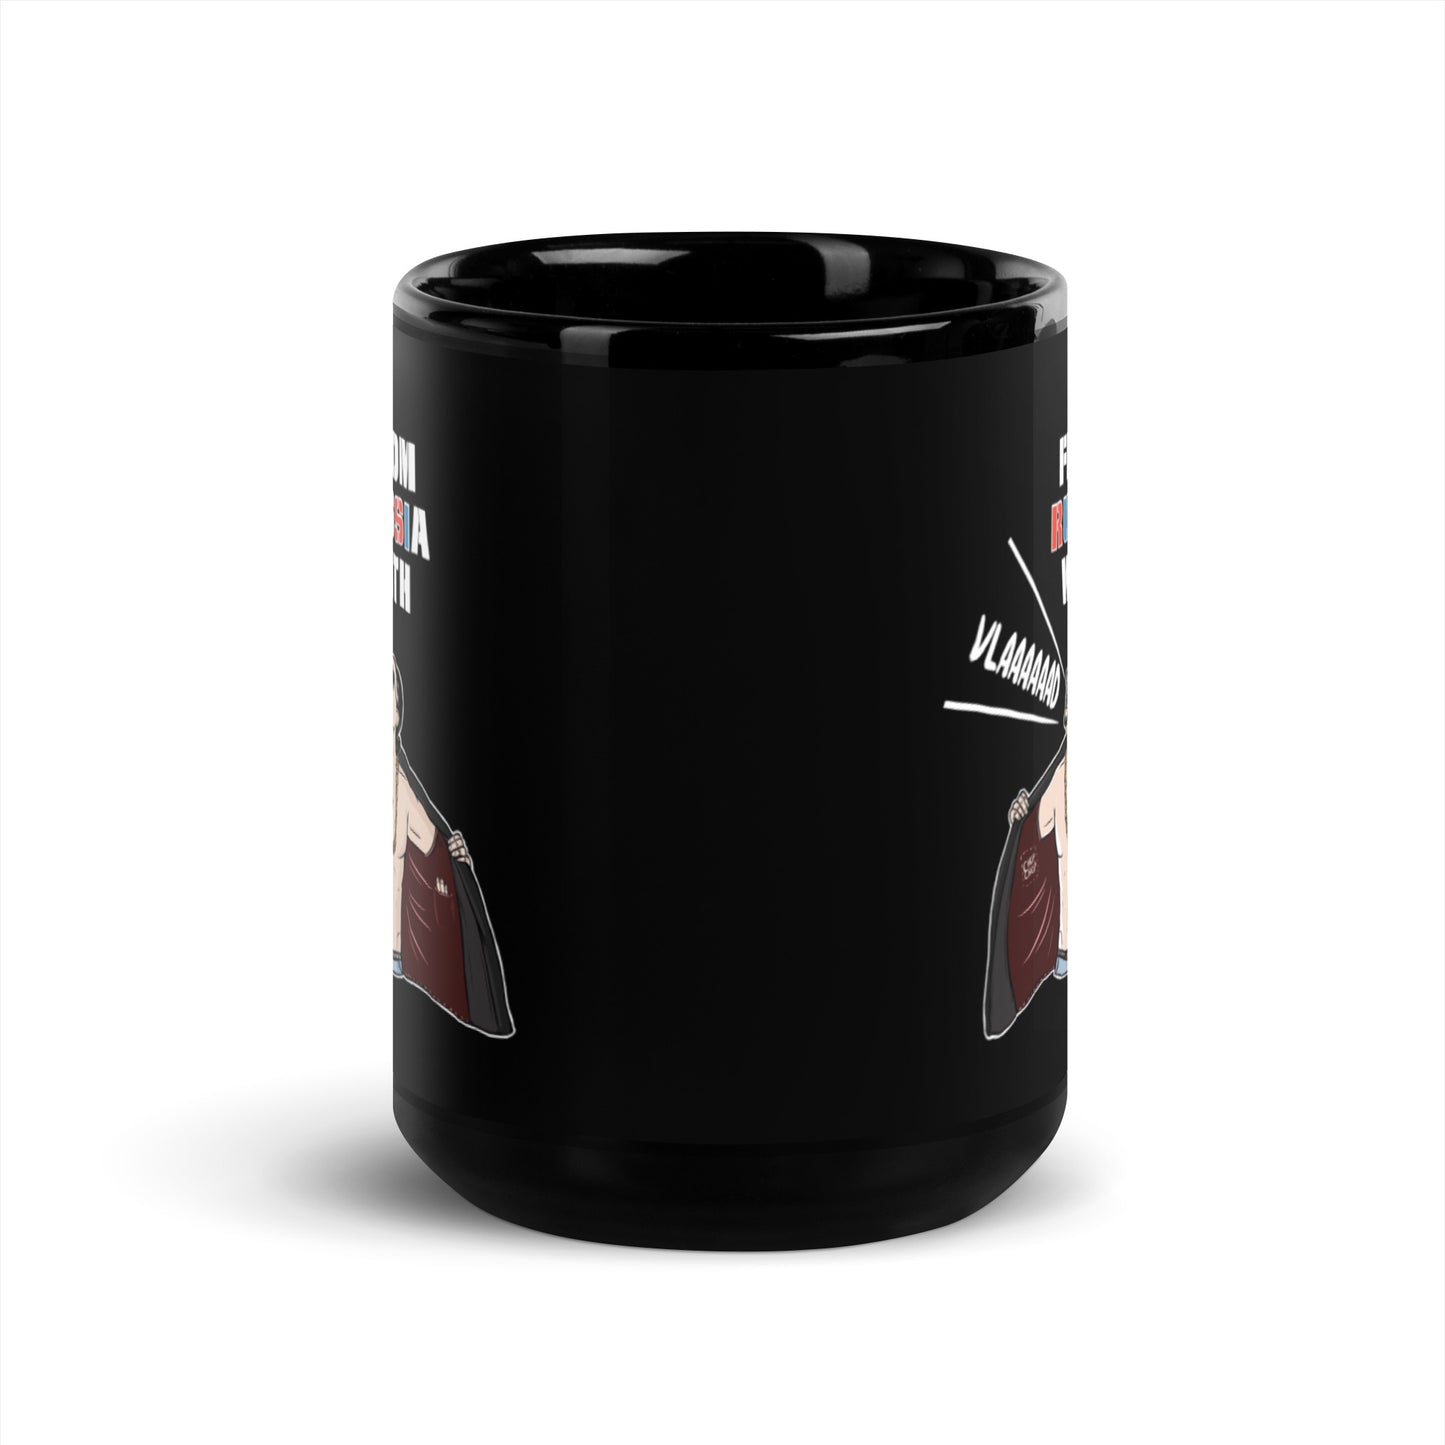 From Russian with VLAD | Black Glossy Mug